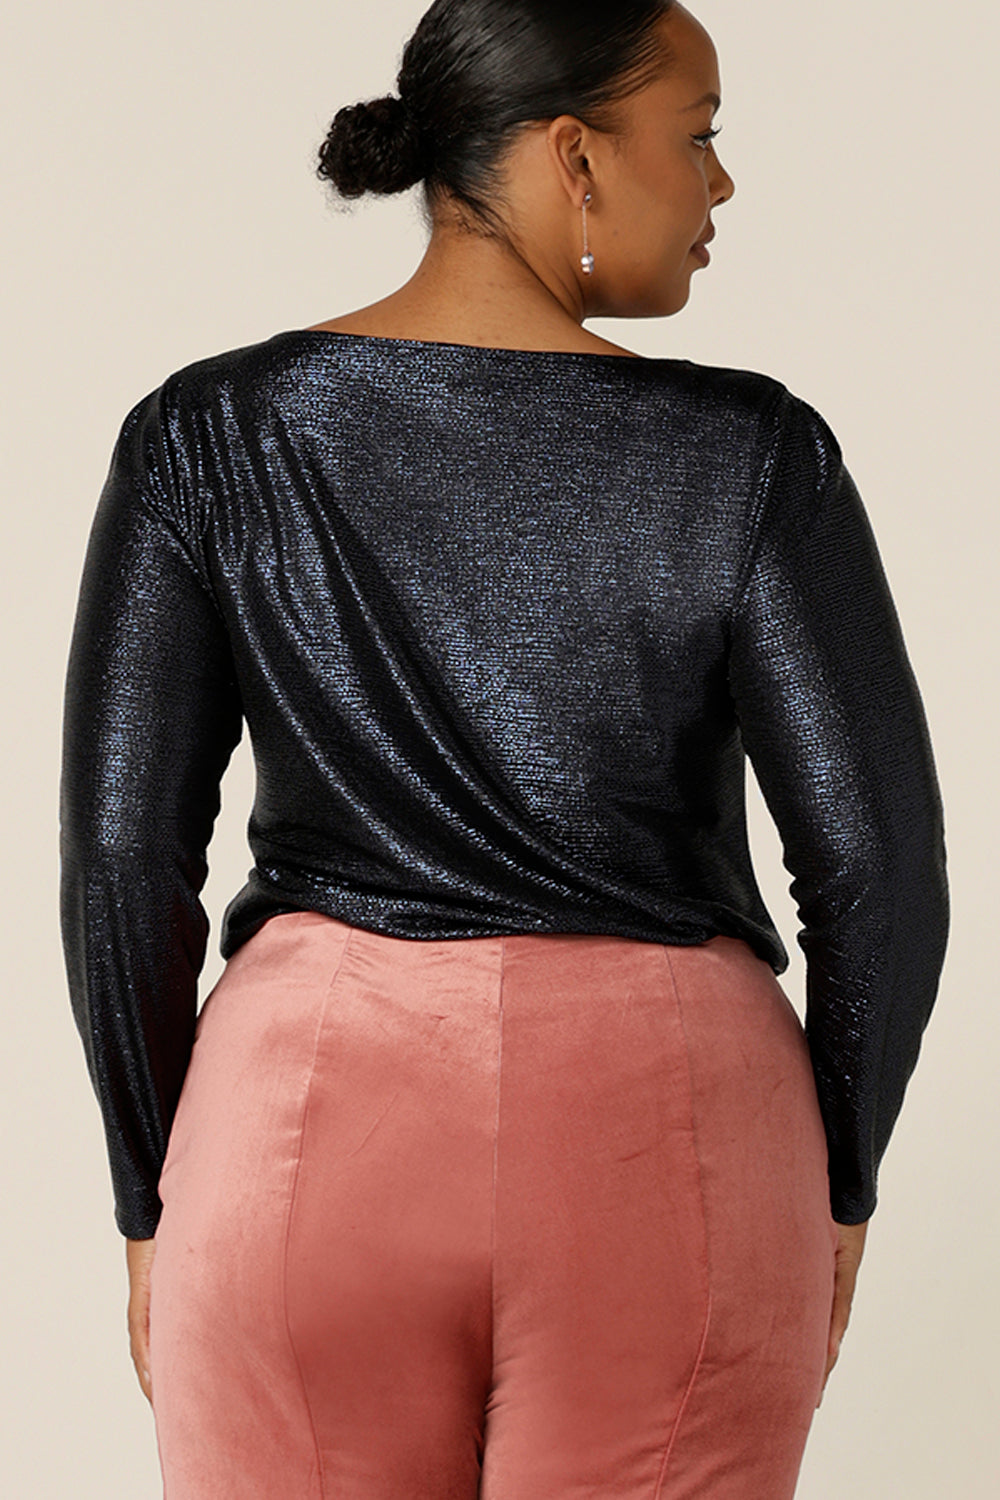 Back view of a fuller figure, size 18 woman wears a sparkly top in shimmering midnight blue jersey top. With a high scoop neck and long sleeves, this modest eveningwear top is great for plus size and 40 plus fashionable women.